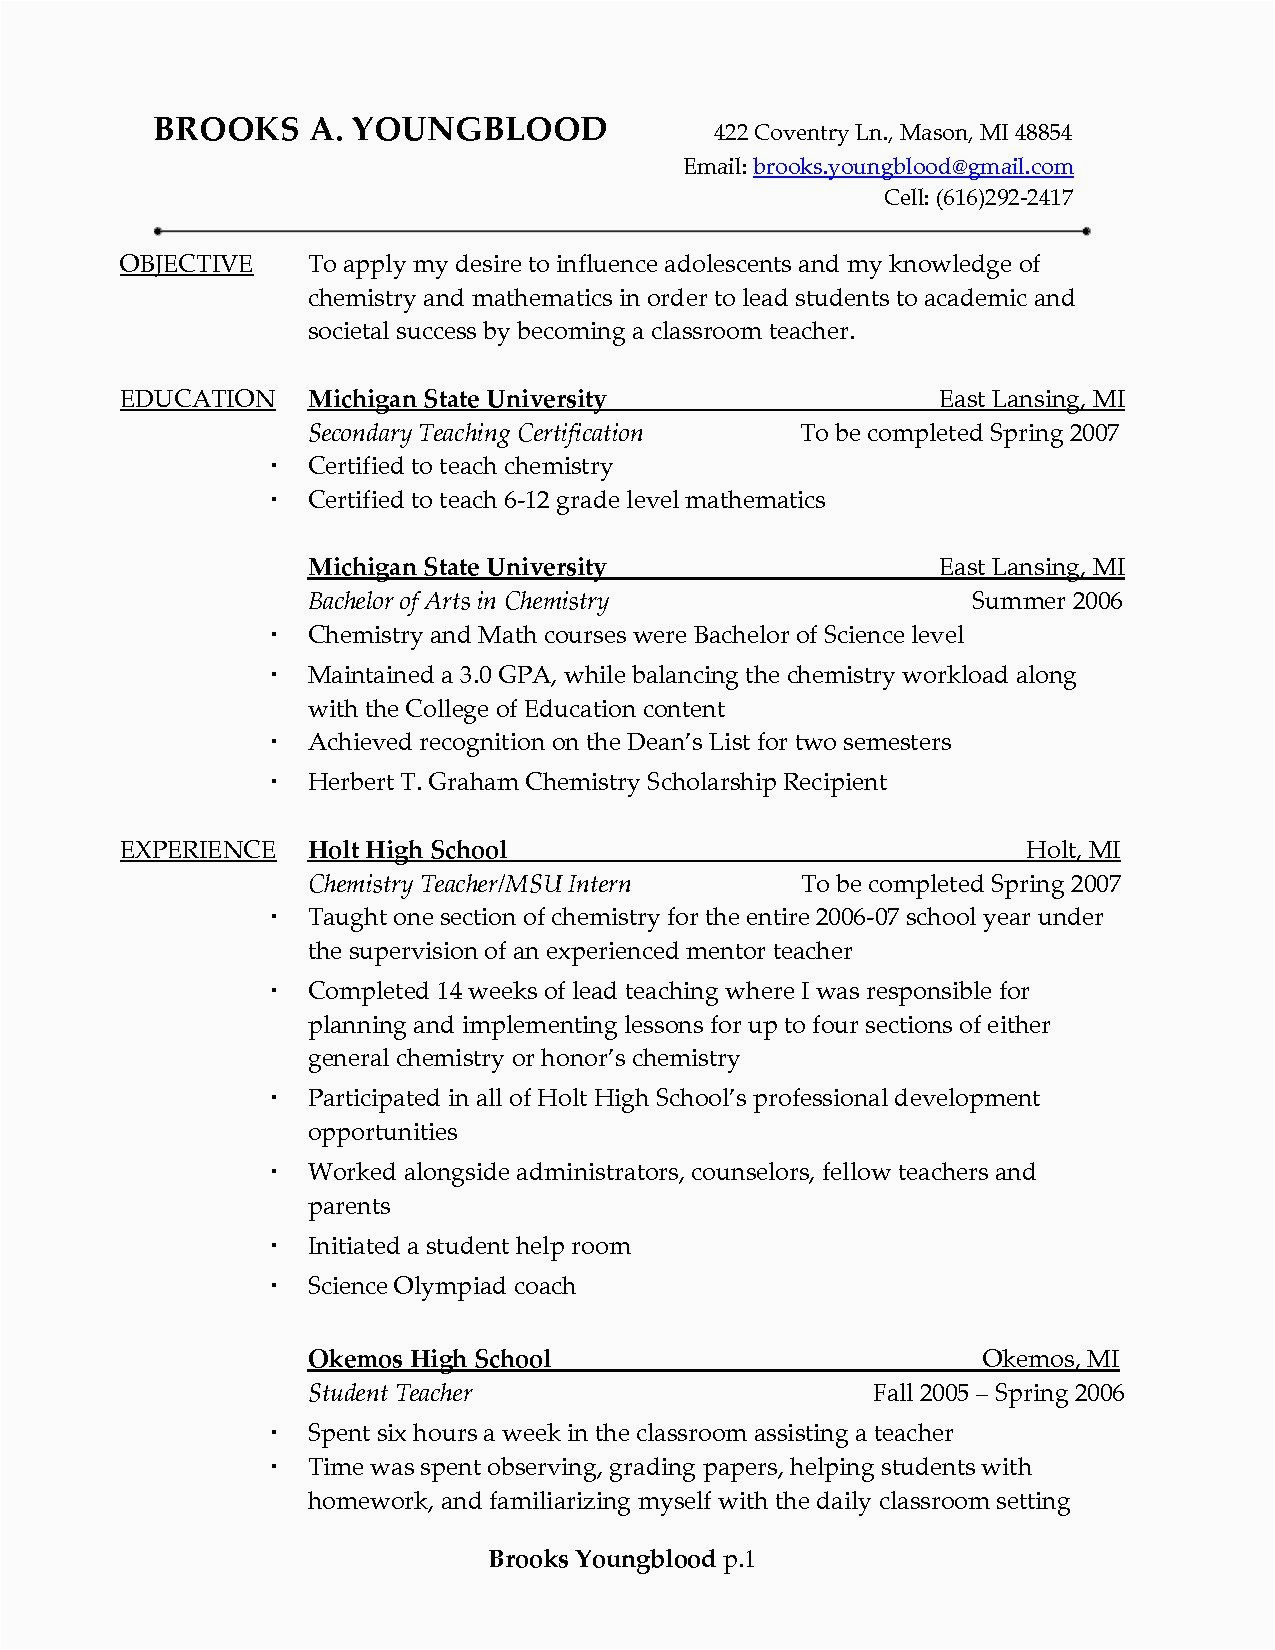 1 Year Experience software Engineer Resume Sample 0 1 Year Experience Resume format